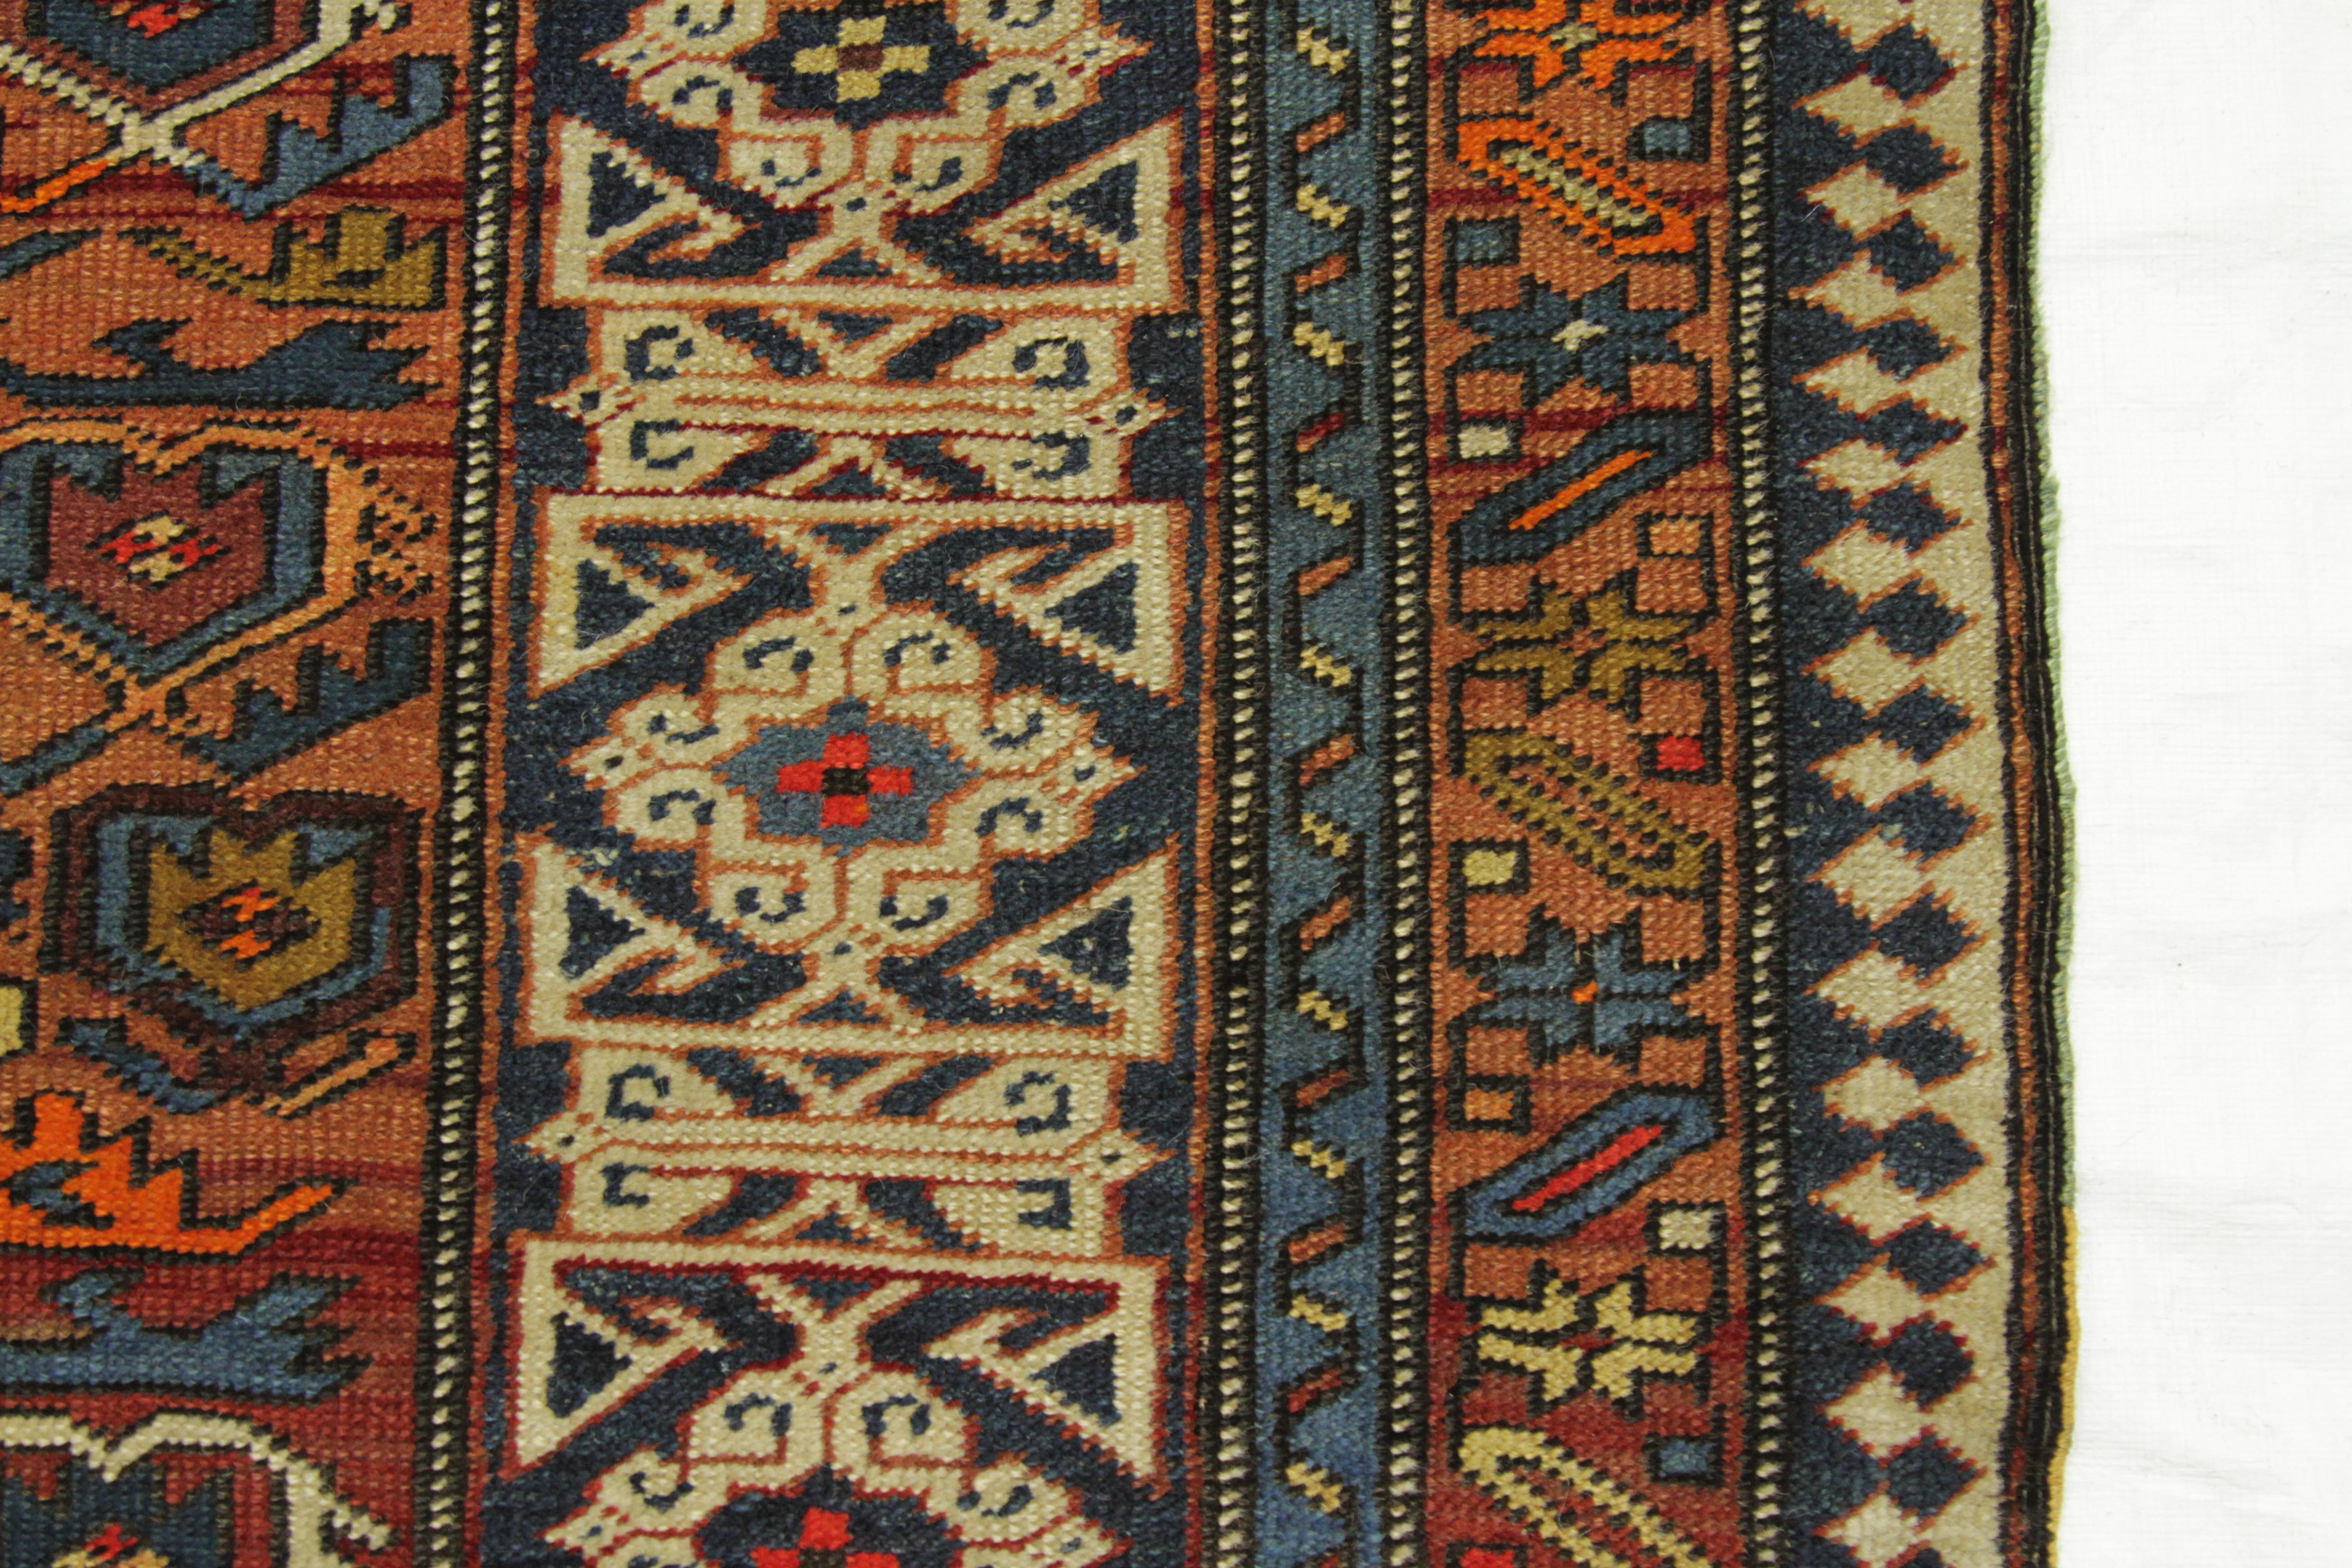 Wool Antique Persian Rug Shirvan Design with Dainty Heart-Shaped Patterns, circa 1930 For Sale